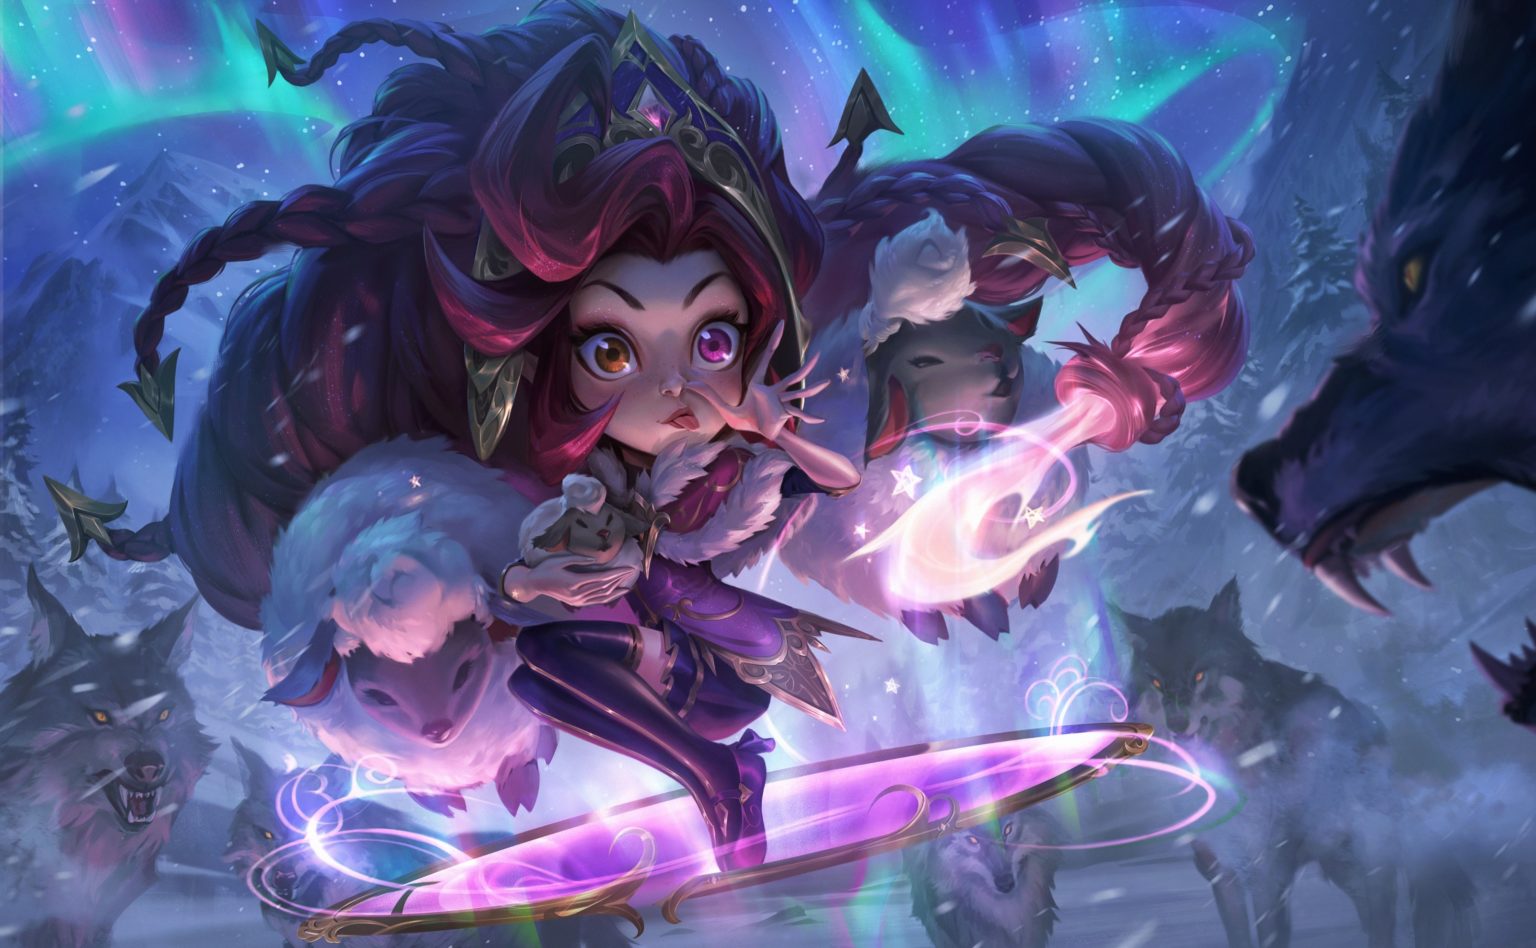 Here are all the Winterblessed skins coming to League this holiday